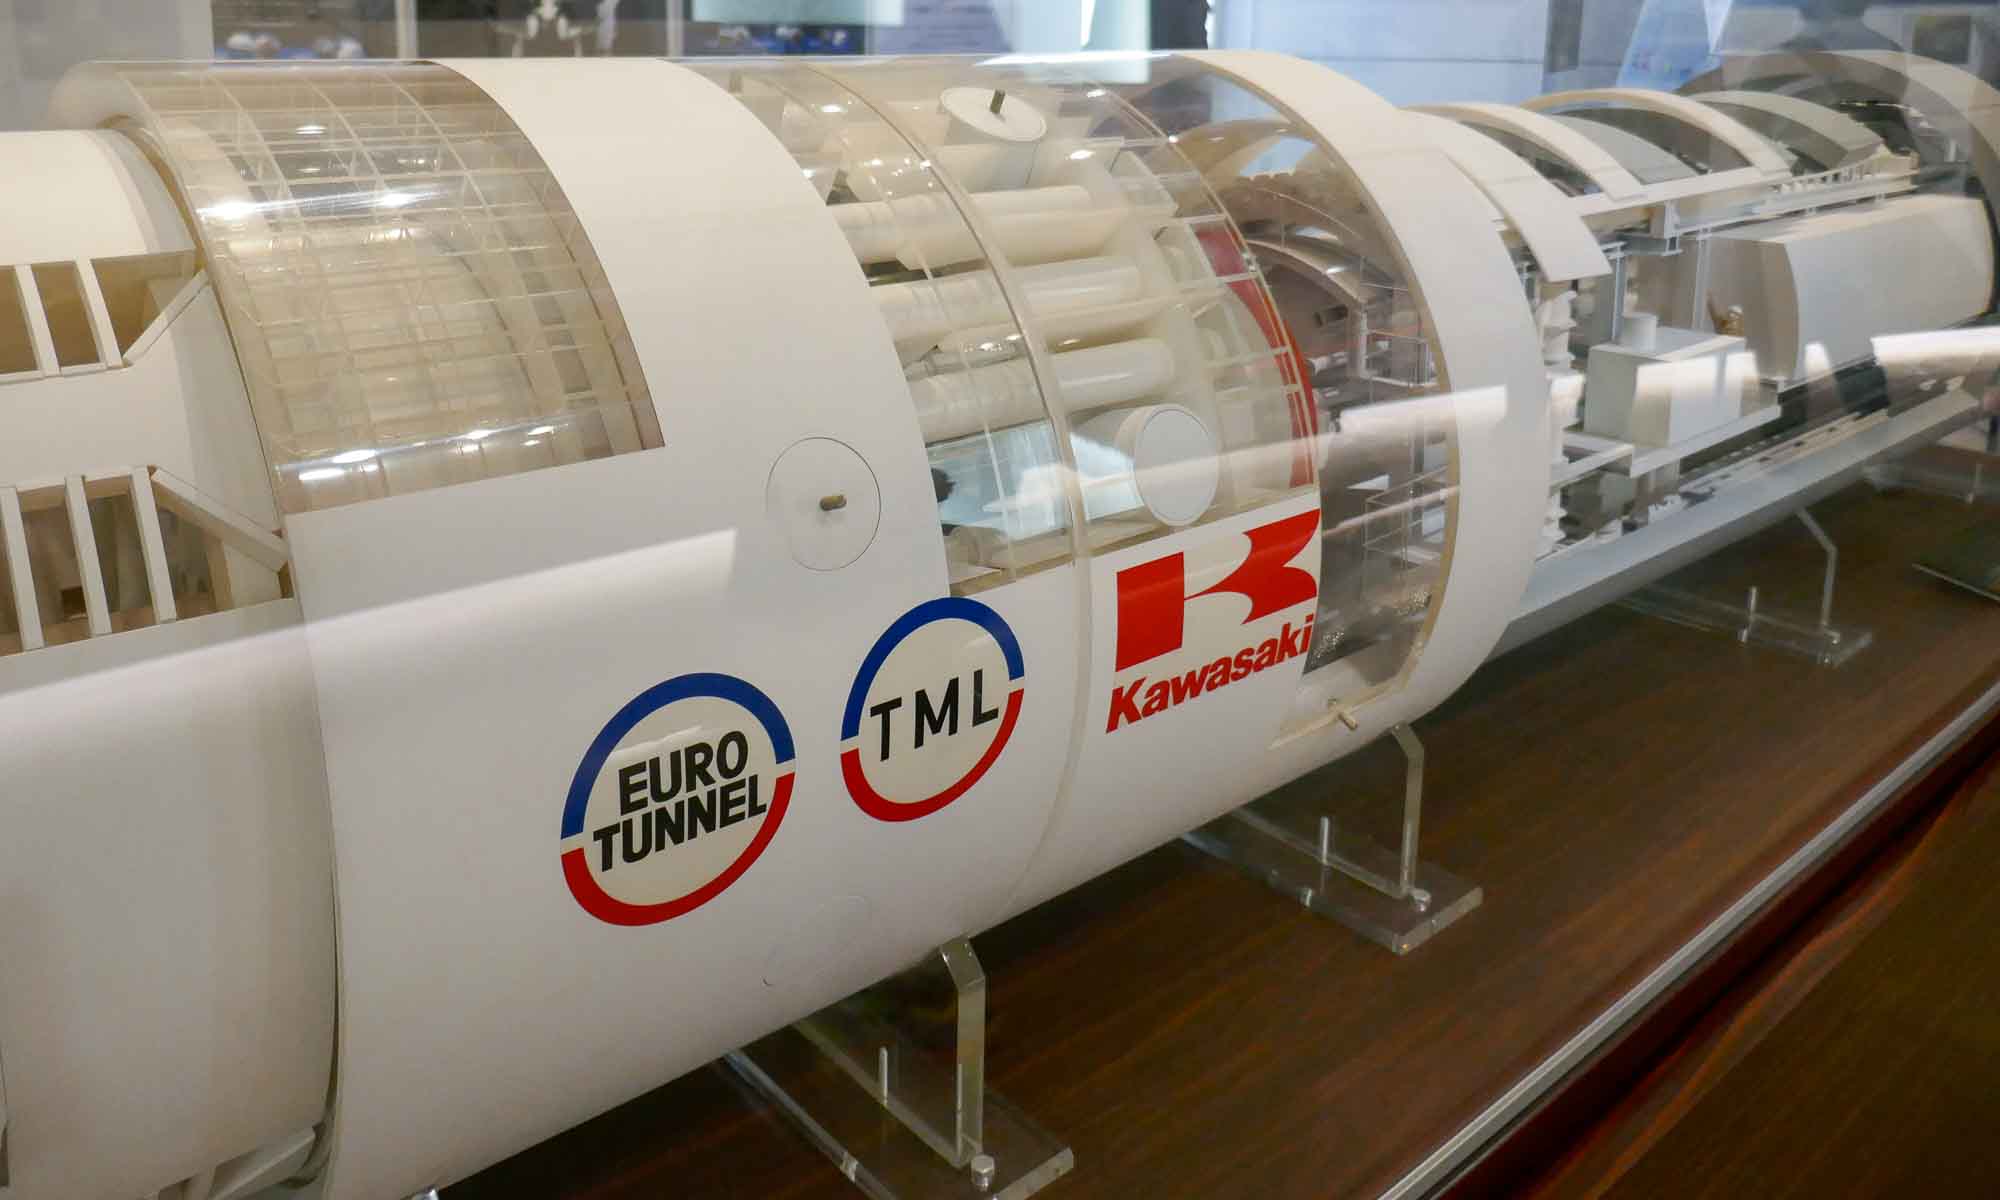 Two Kawasaki Boring Machines (1/20 scale) drilled the Eurotunnel, between France and England 